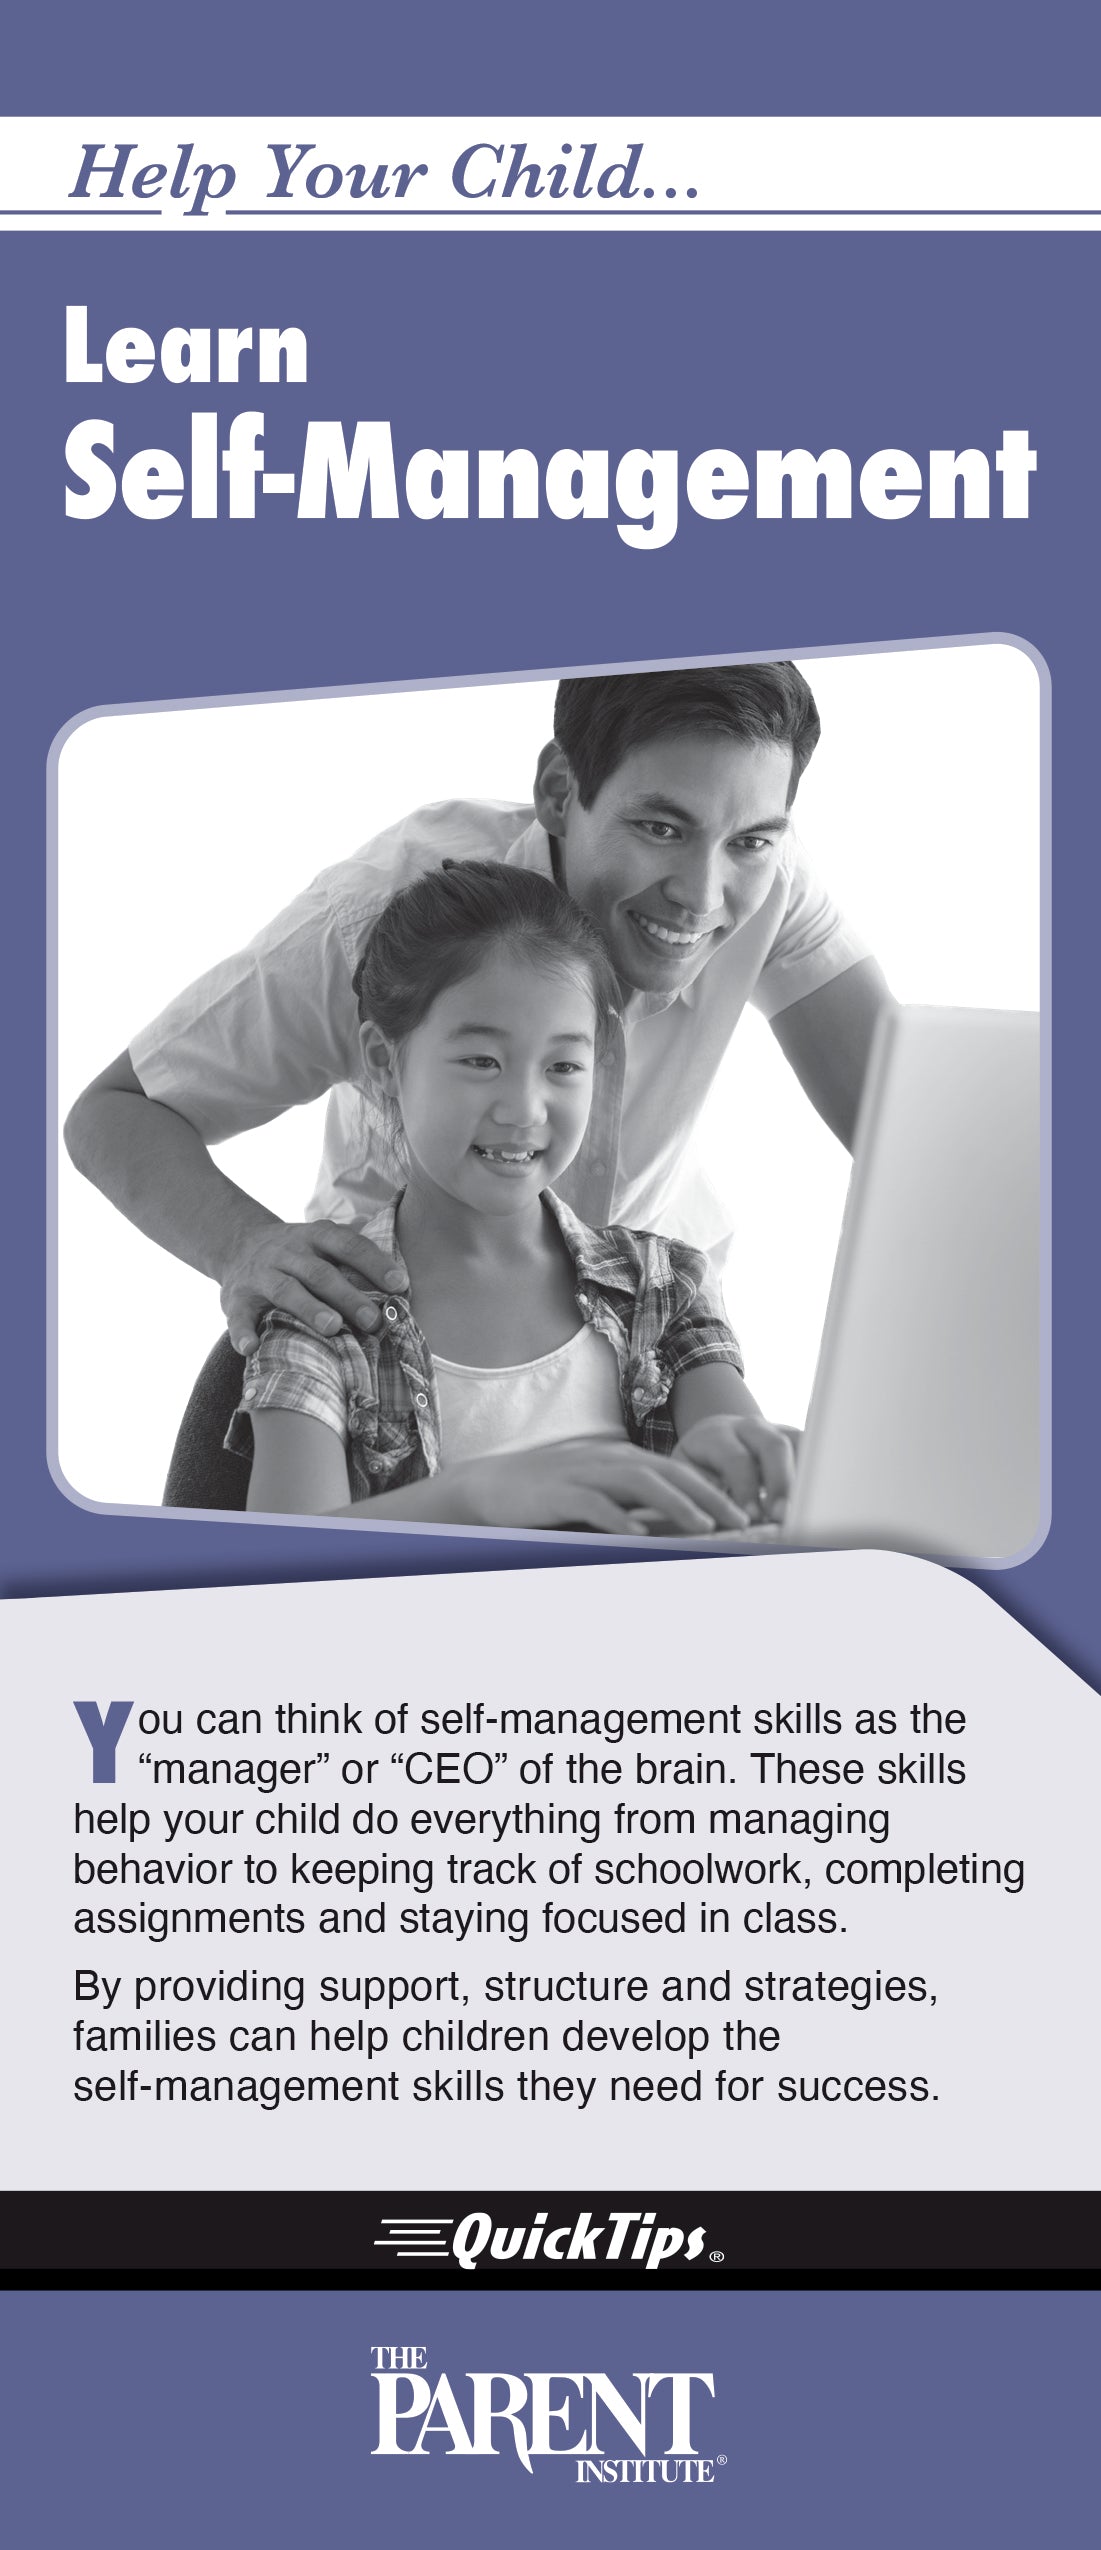 Help Your Child Learn Self-Management - The Parent Institute